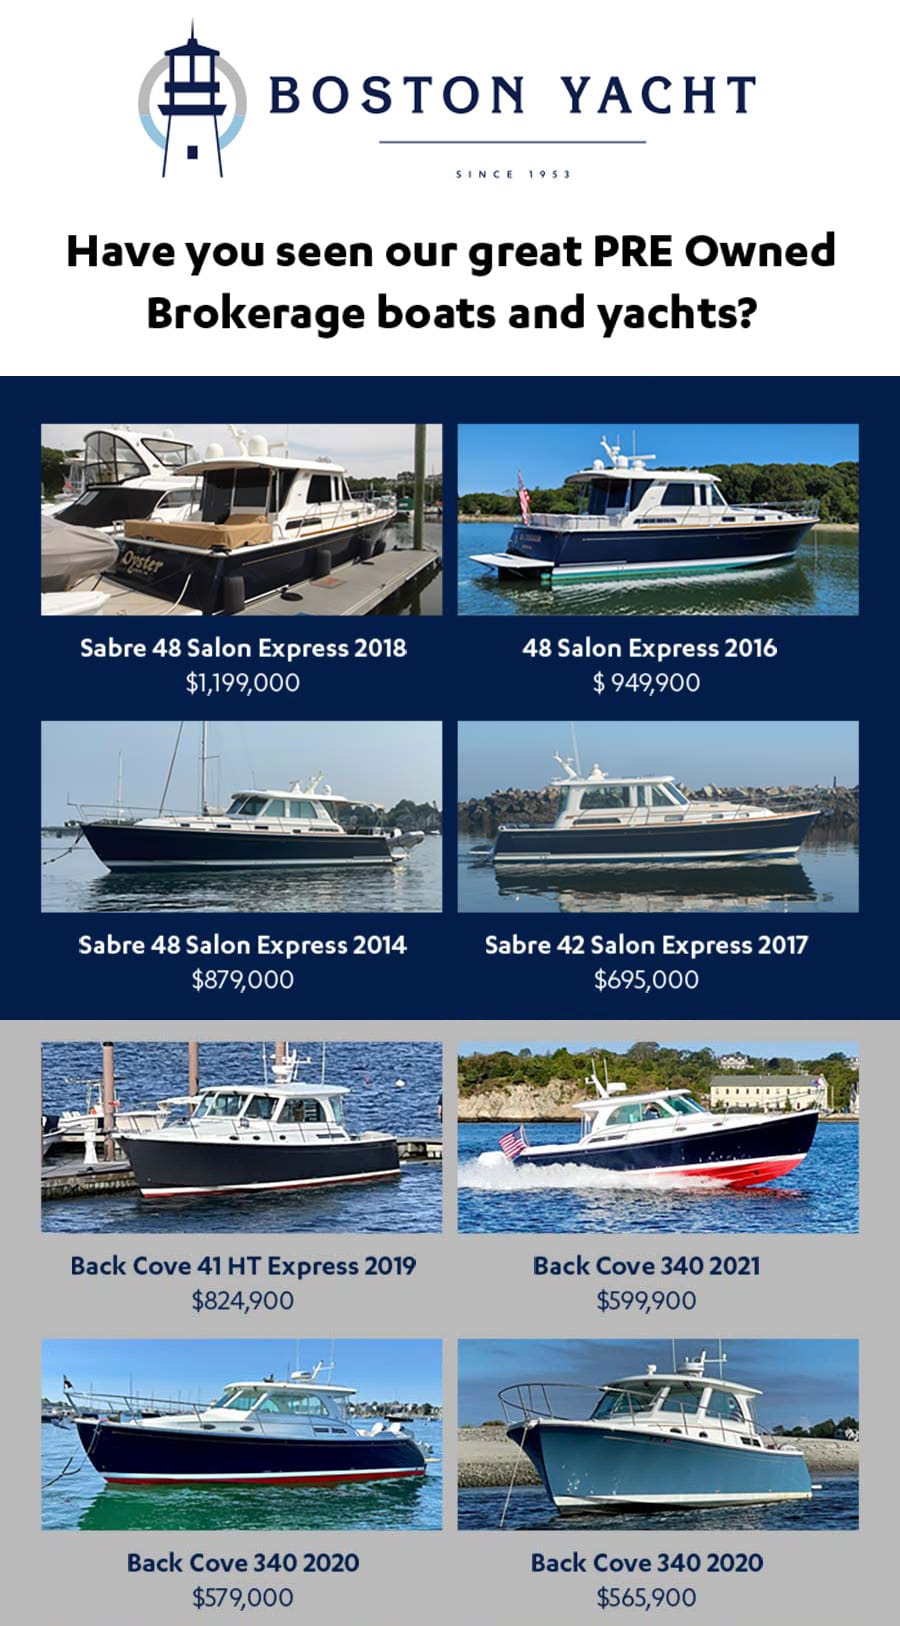 Have you seen our great PRE Owned Brokerage boats and yachts?